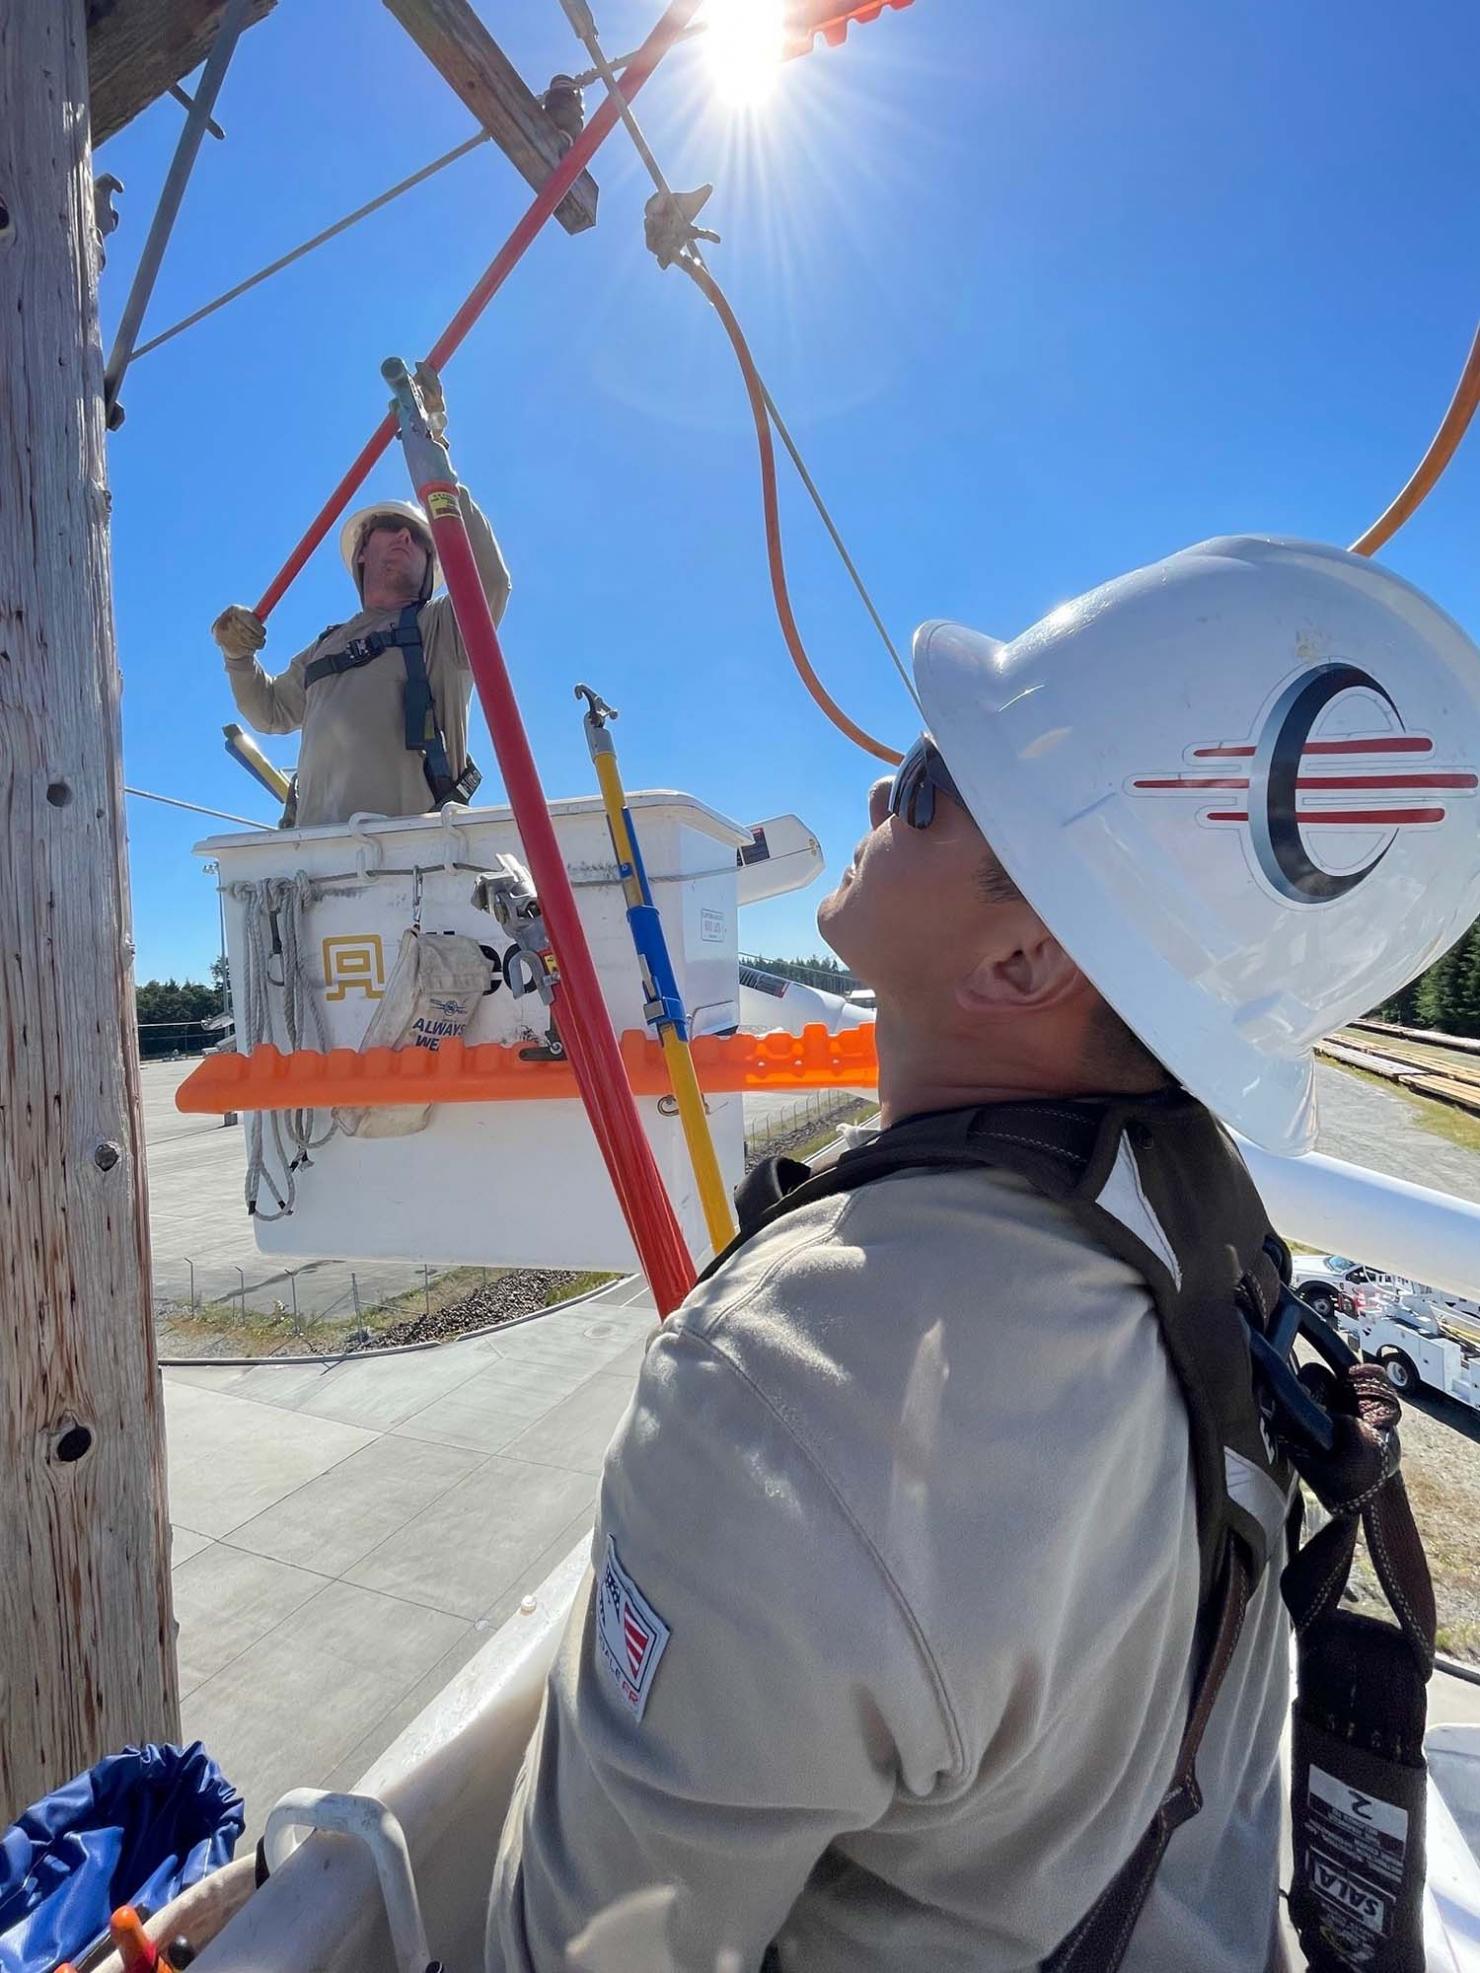 City Light & Power has a long history as a private utility developer, owner and operator, and we offer our robust infrastructure engineering and development services to utilities and electric co-ops nationwide.